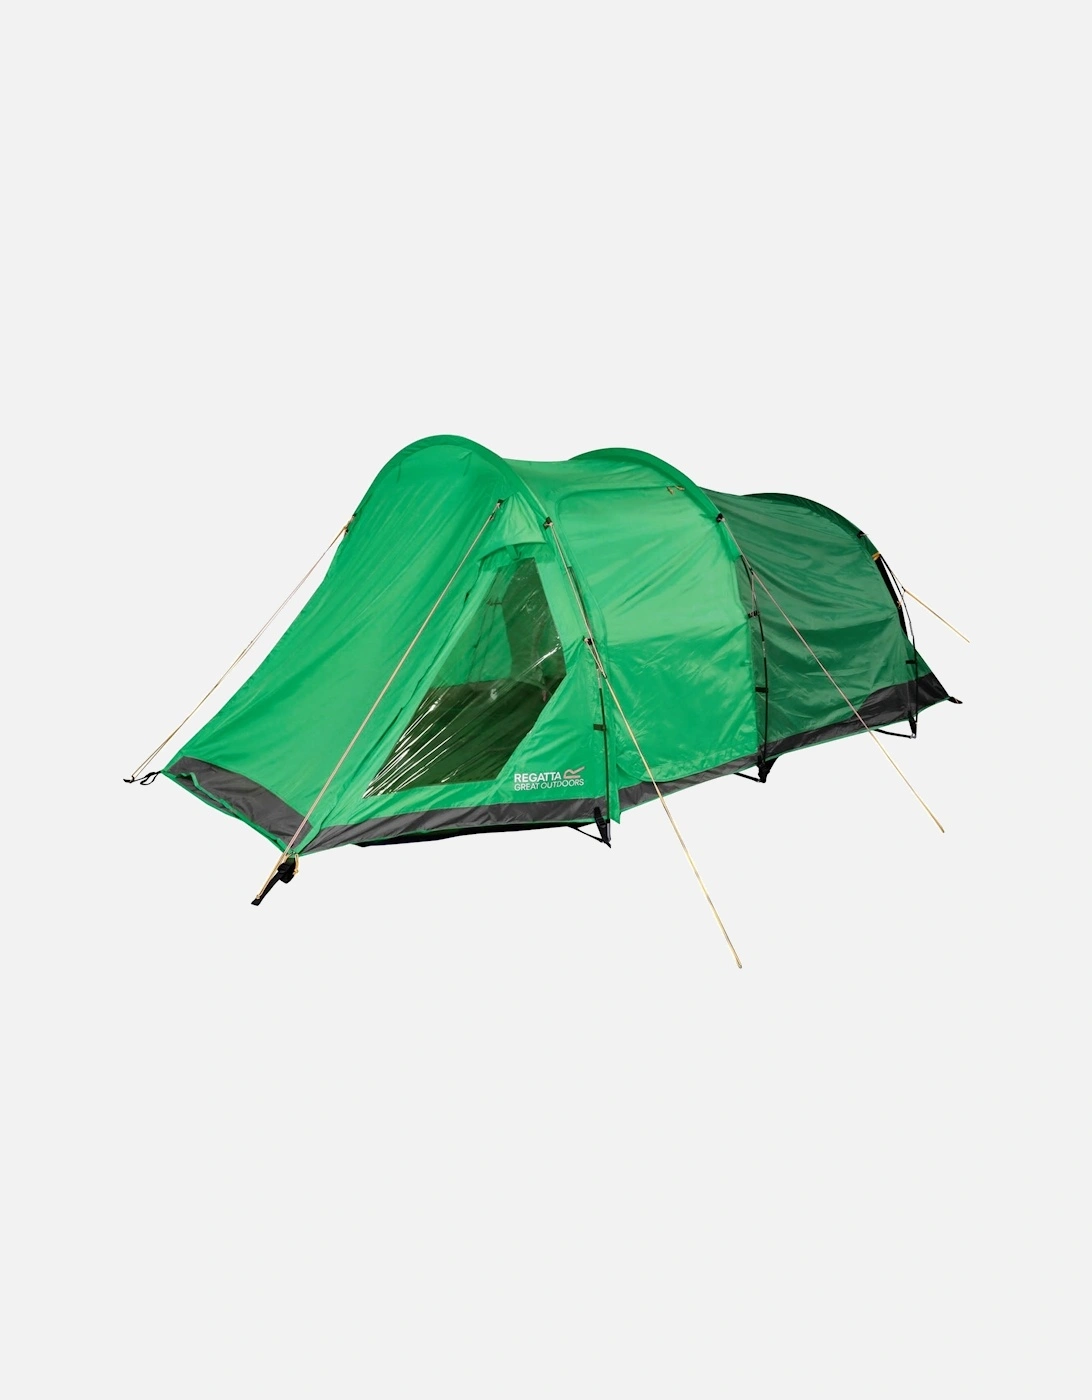 Vester 4 Man Tunnel Waterproof Camping Tent - Extreme Green, 12 of 11